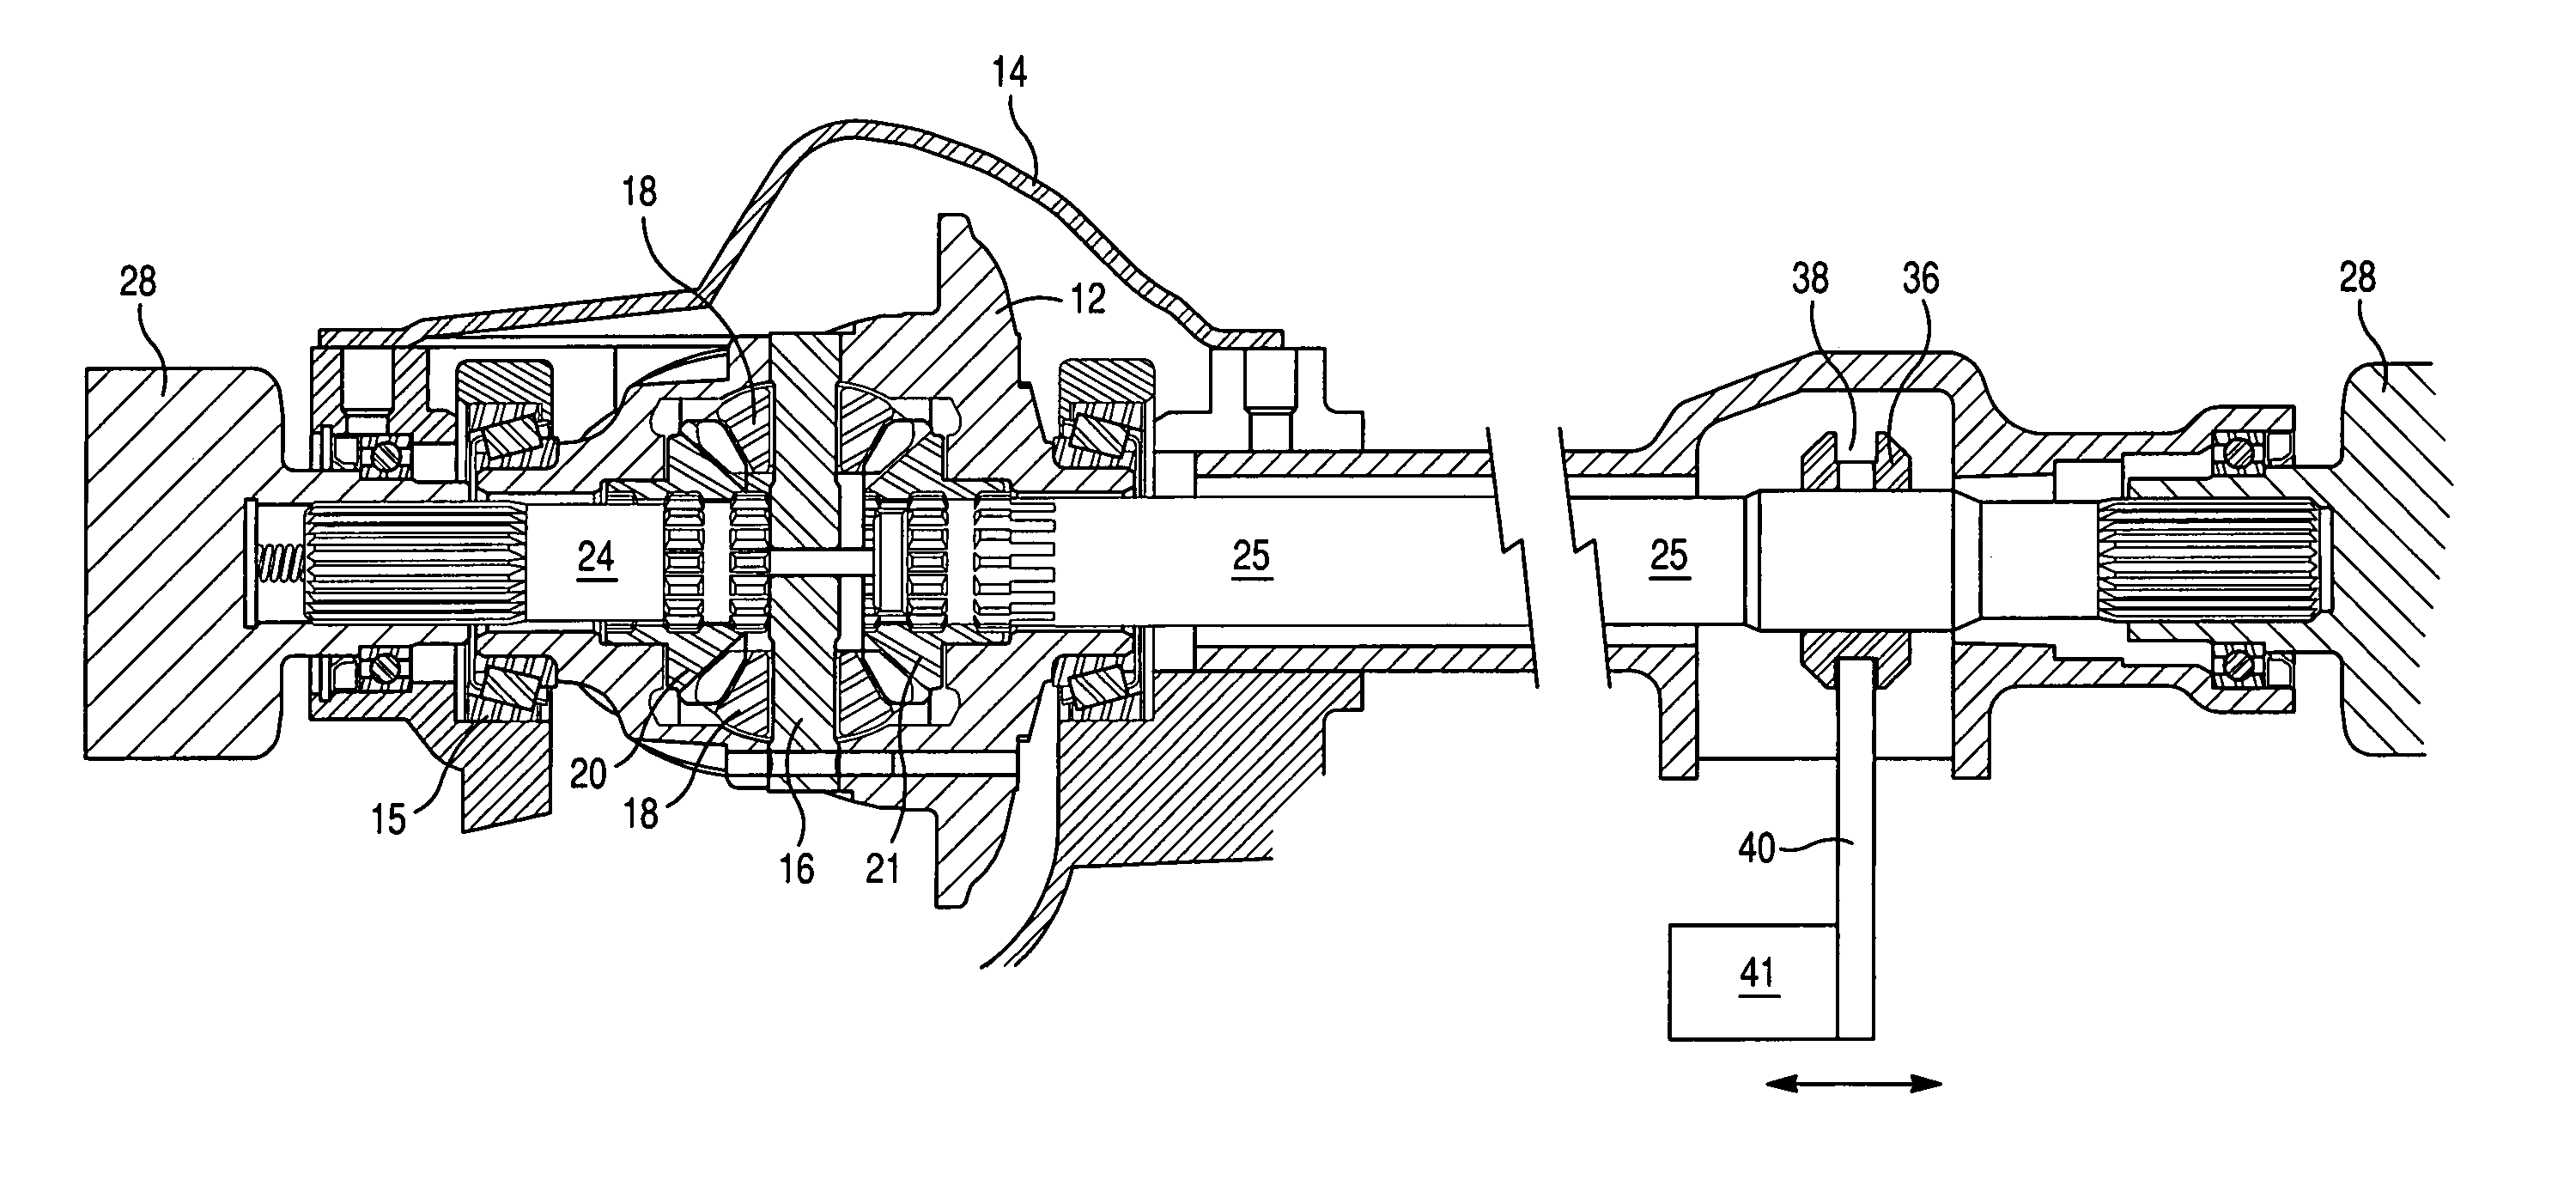 Double disconnect assembly for multi-axle vehicles